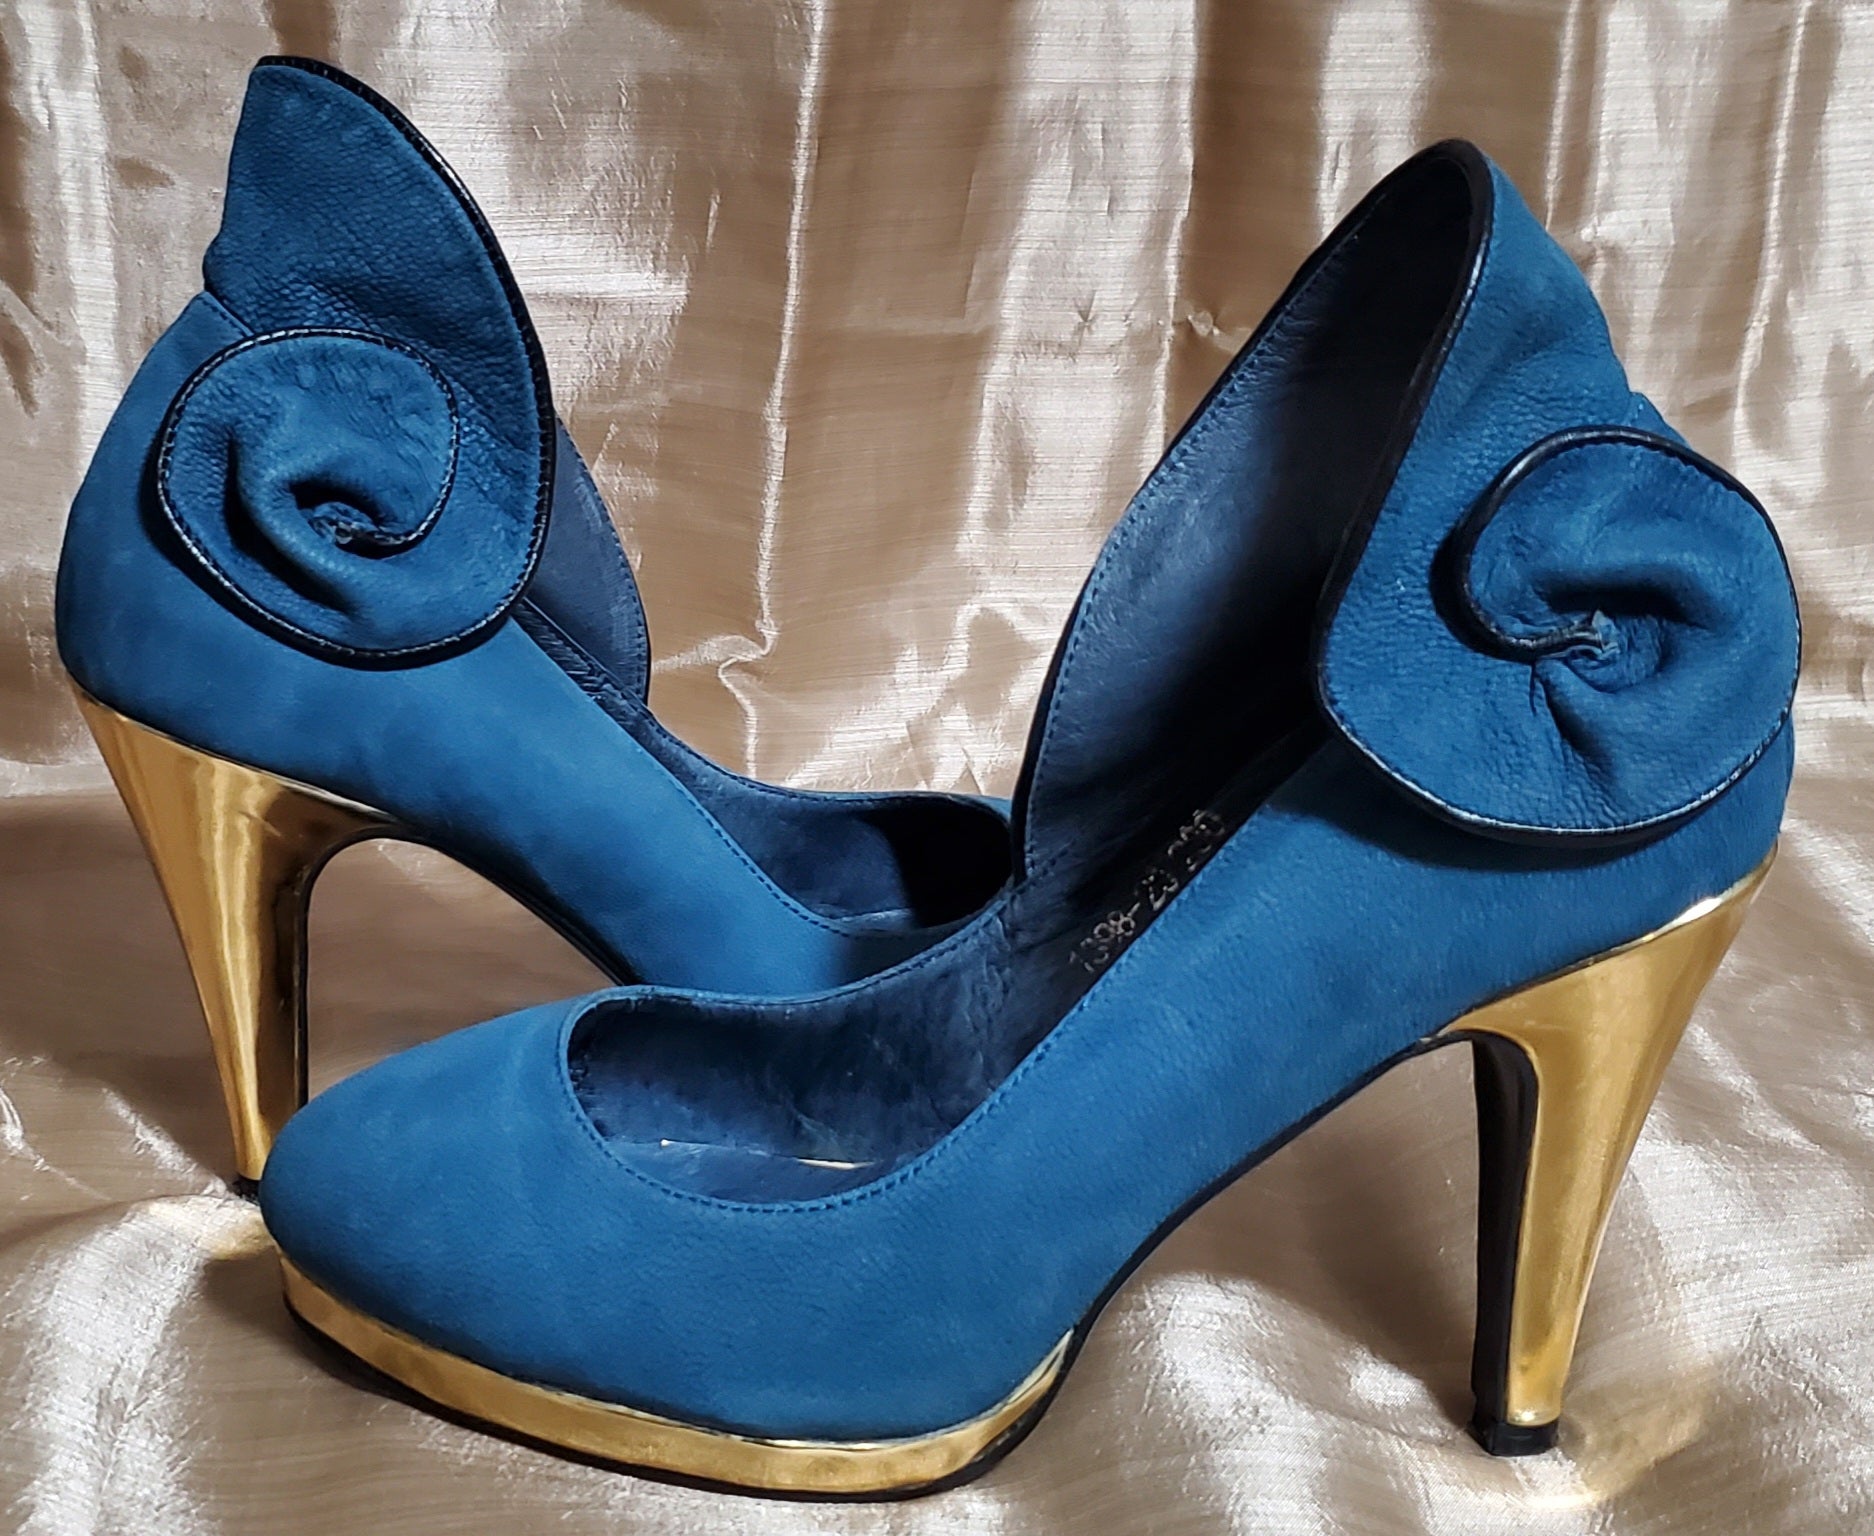 Side view of Suann Villa blue and gold leather pumps with ruffle details